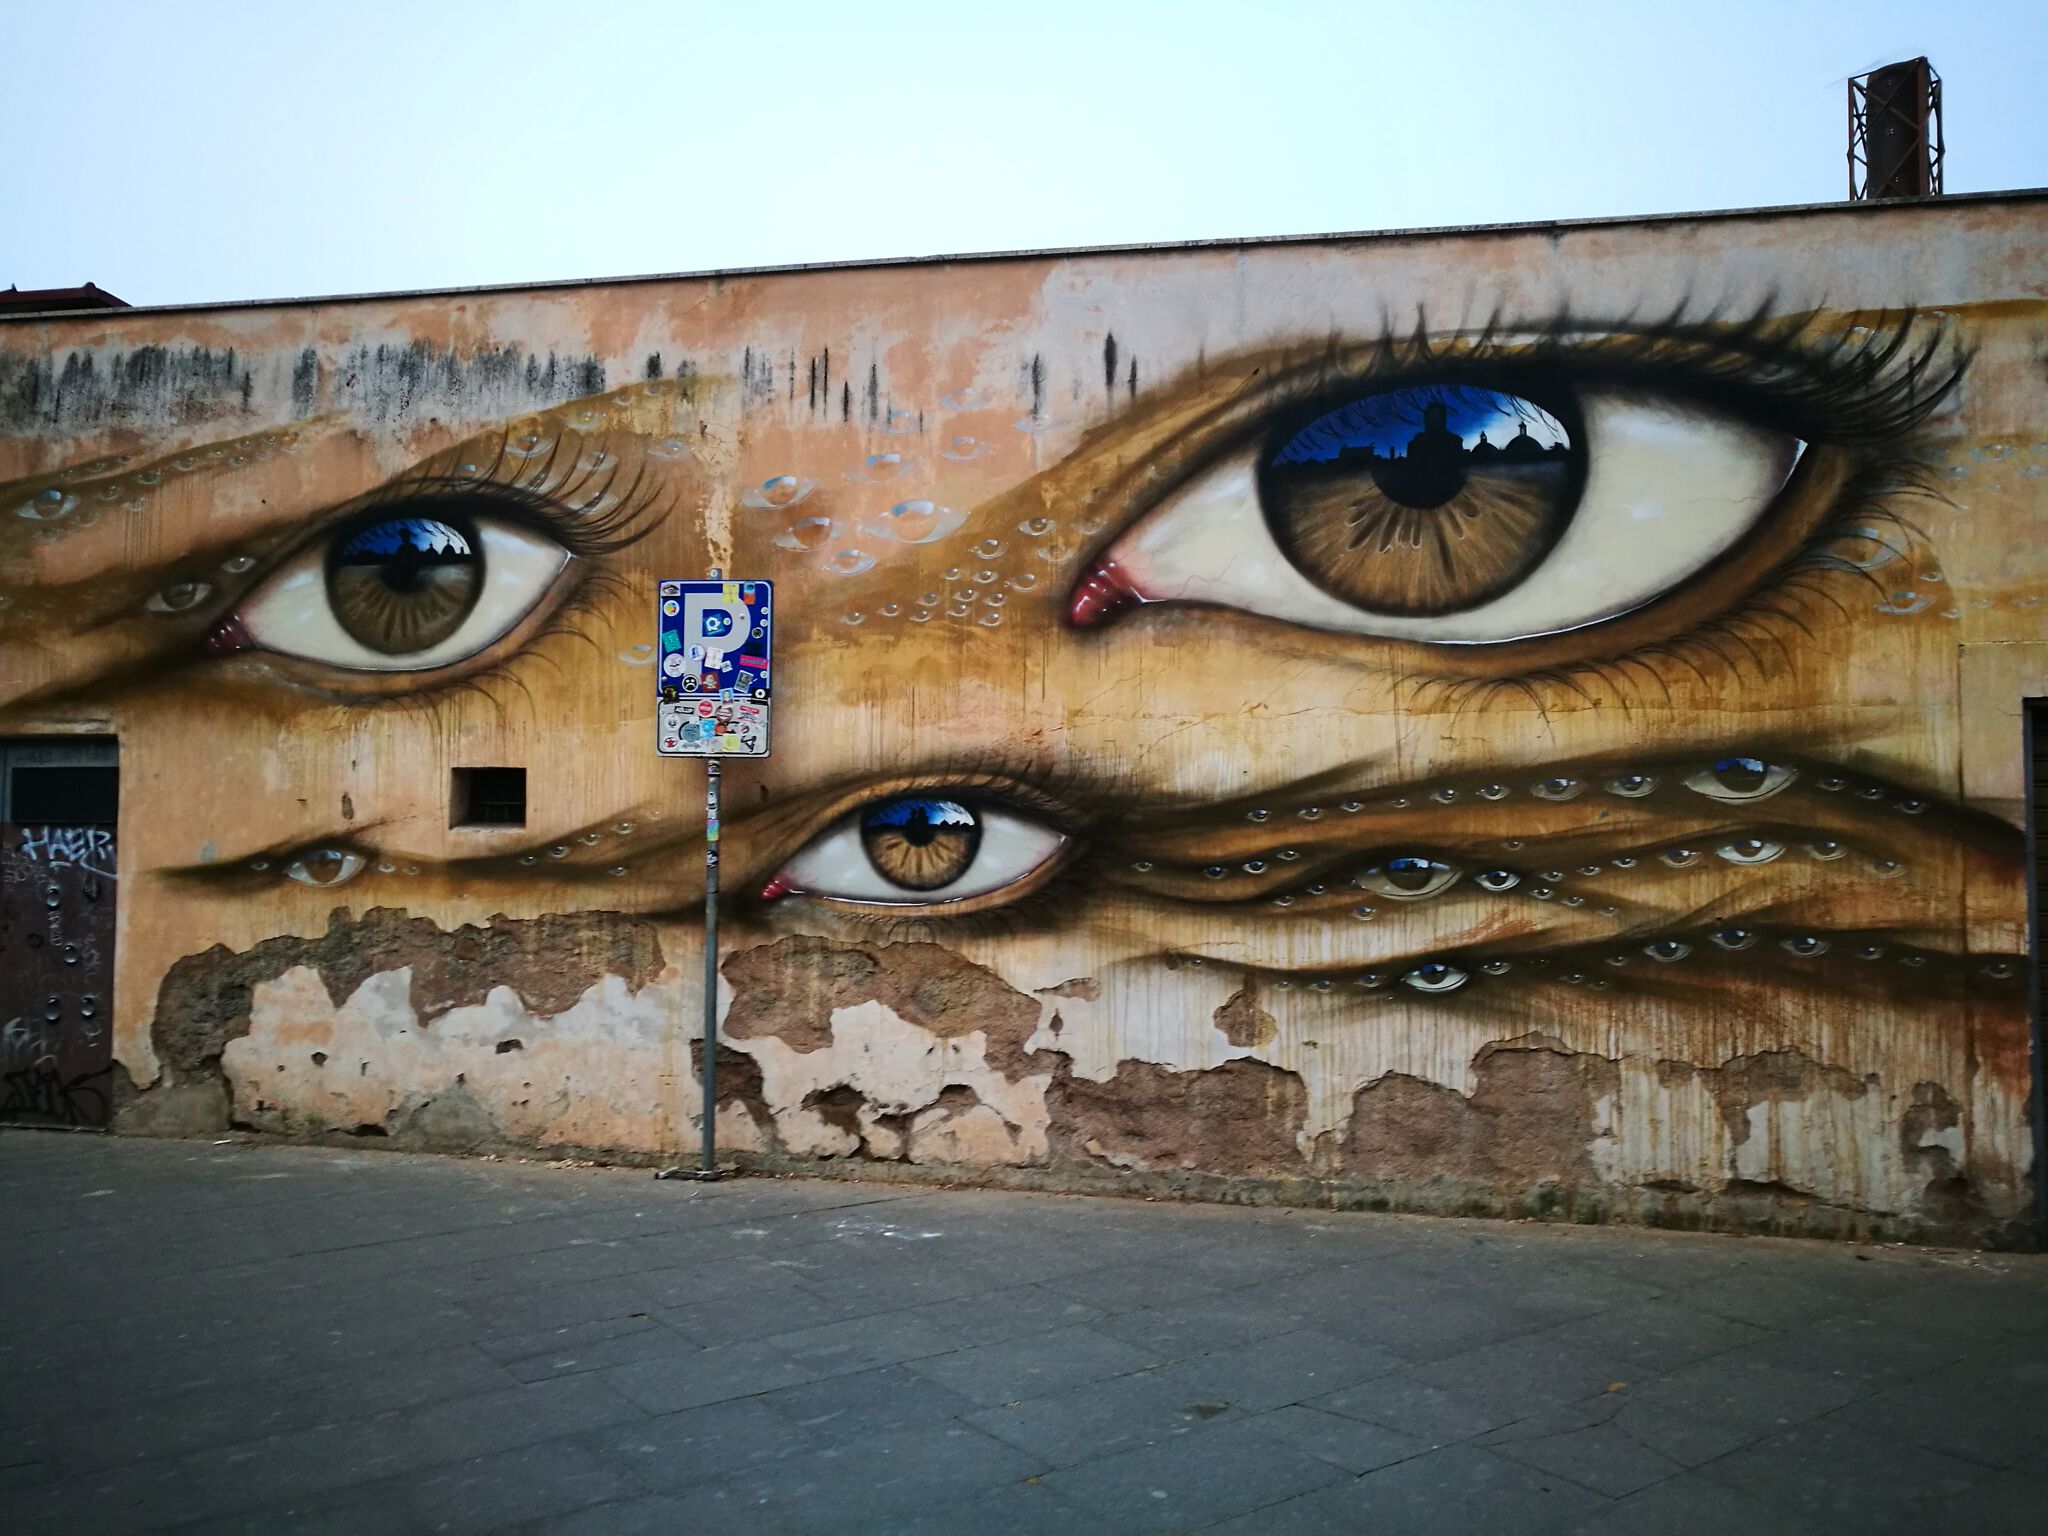 My Dog Sighs&mdash;I still remember how it was before